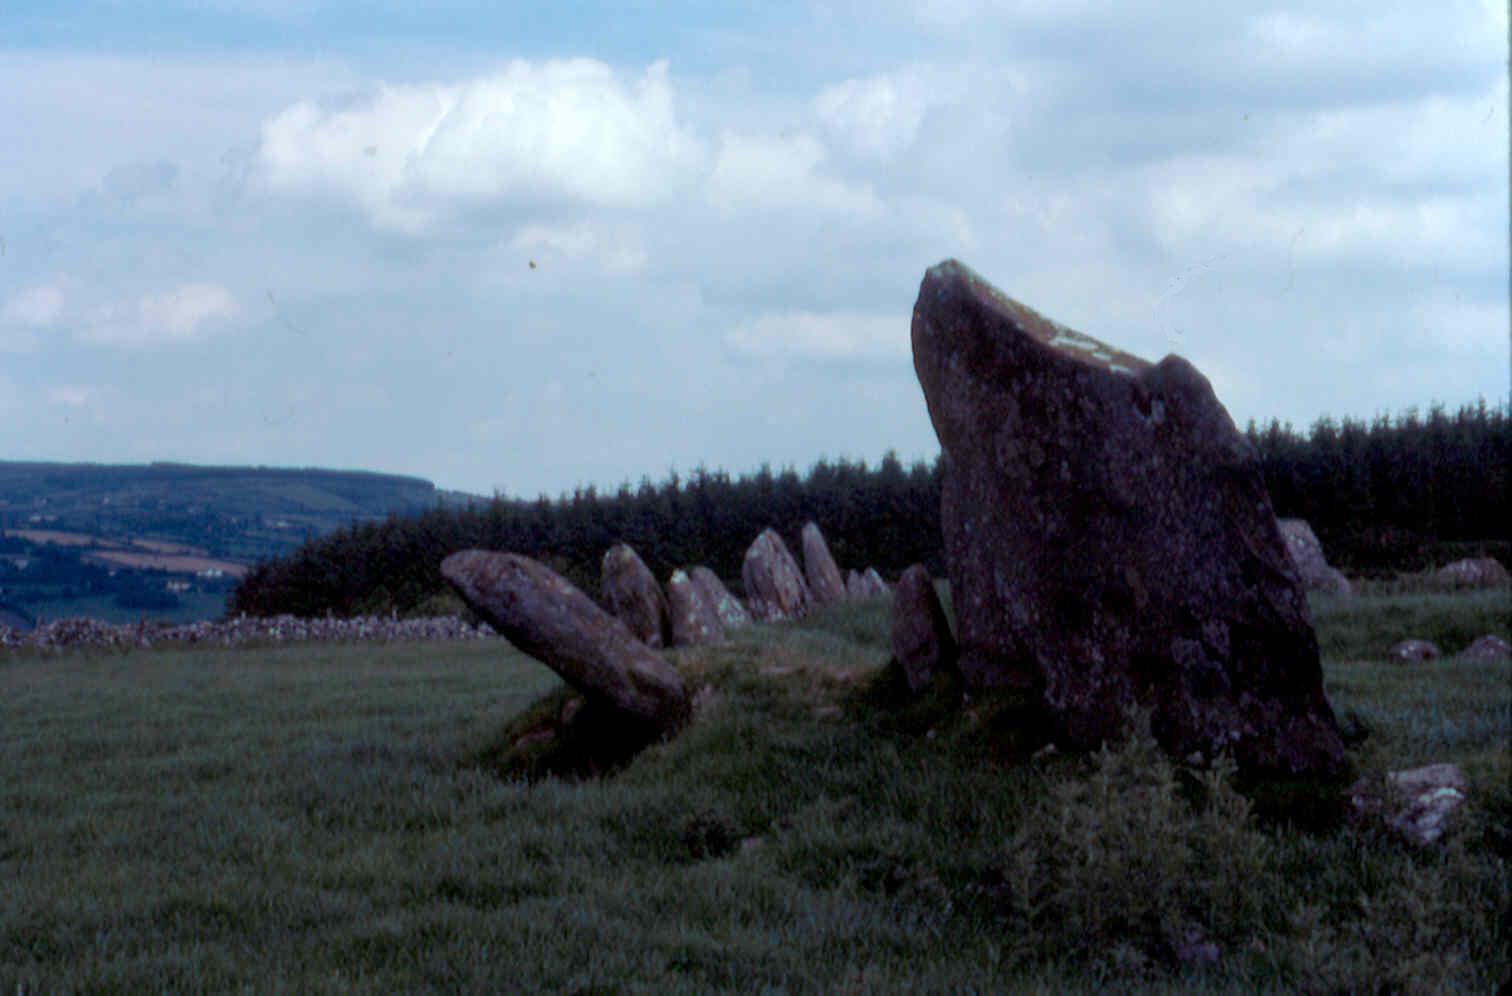 Beltany Stone Circle, Raphoe, Co. Donegal